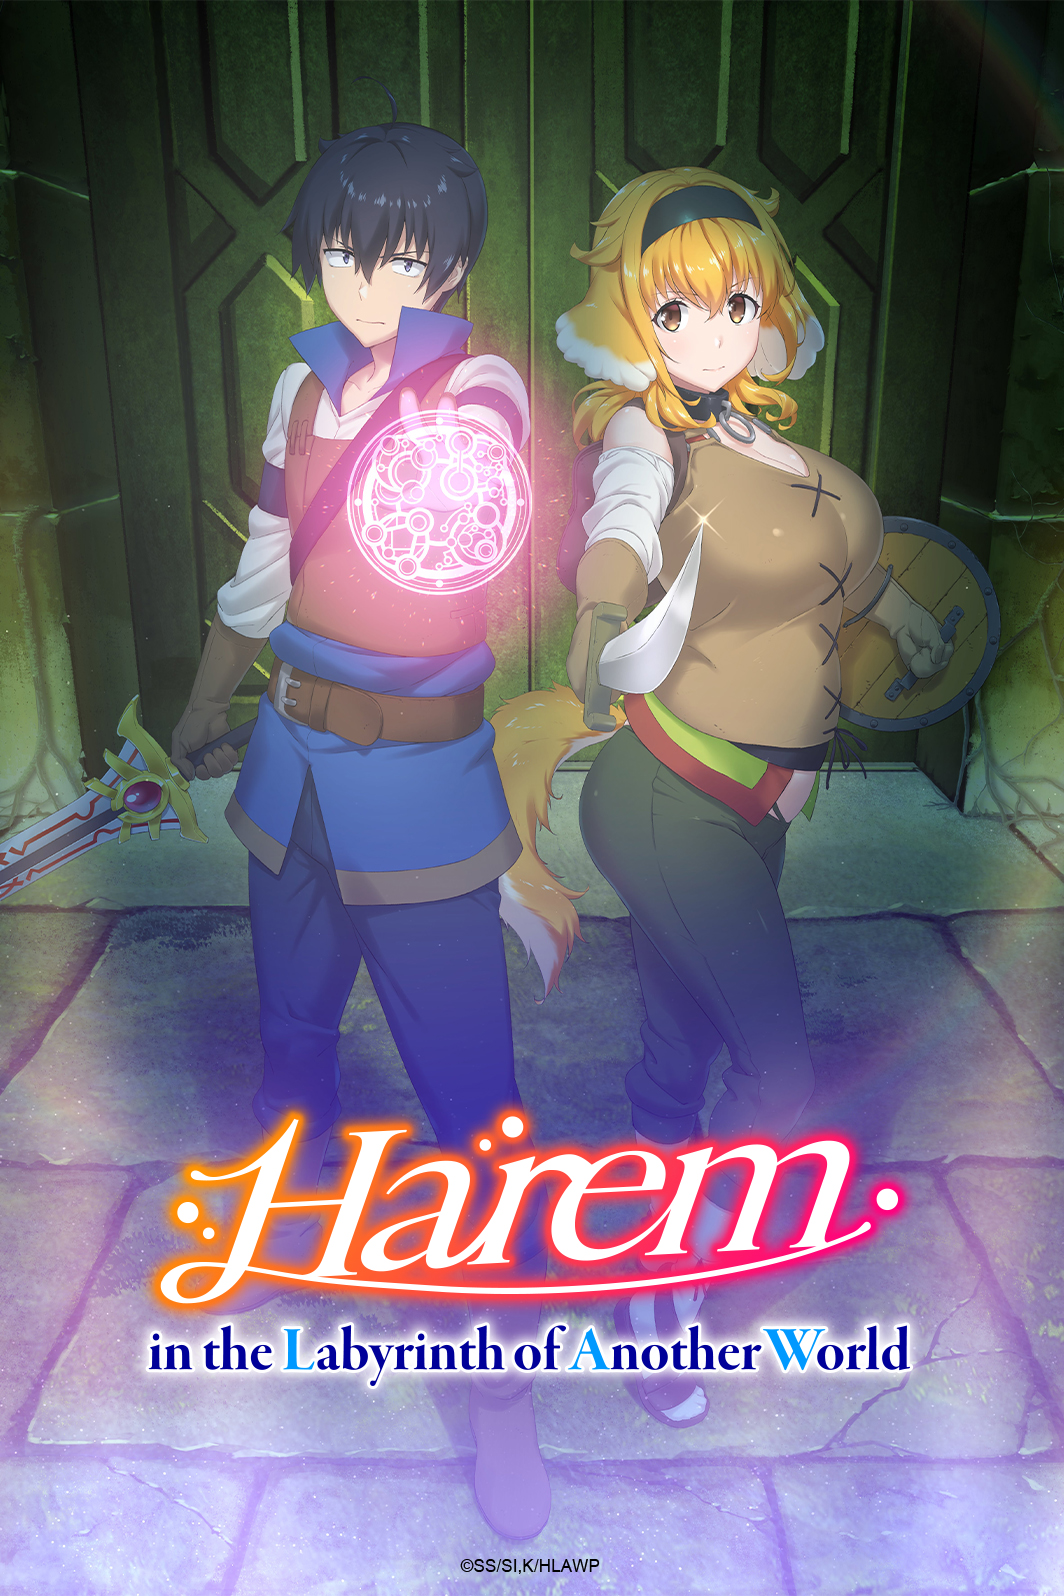 Harem in the Labyrinth of Another World Episode 1 - Encounter English  Subbed Reaction 